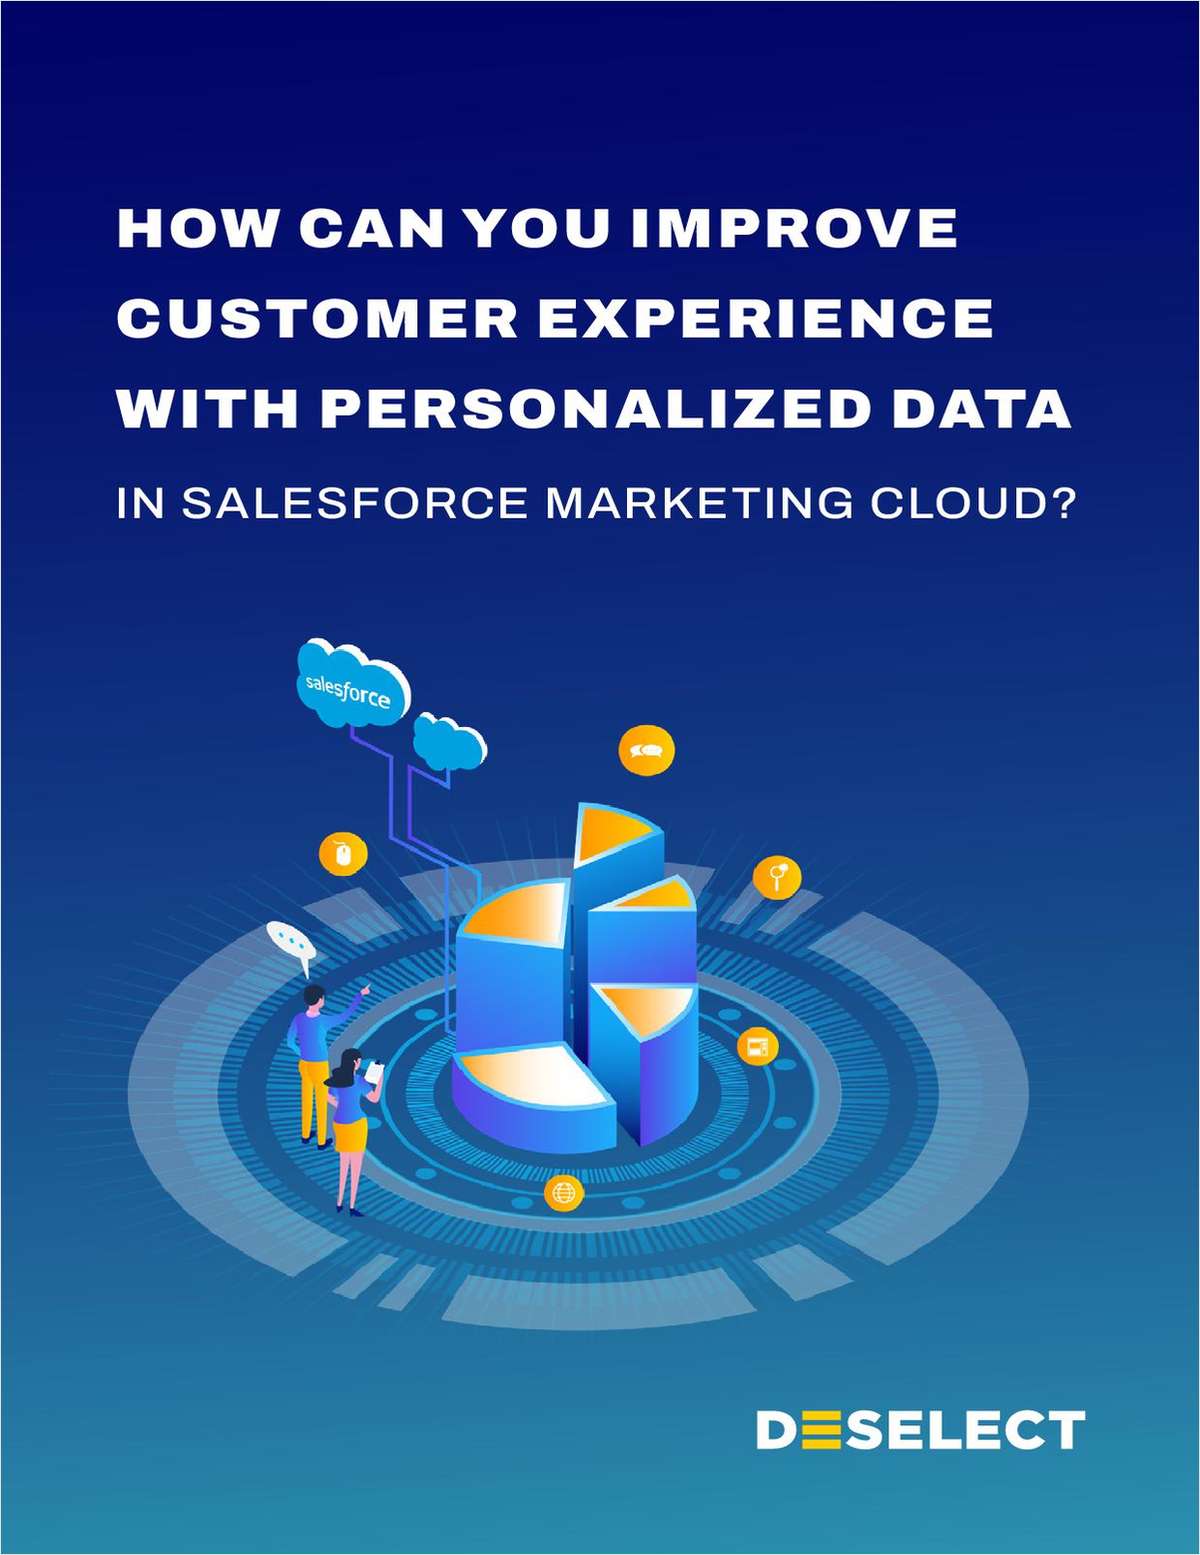 How can you improve customer experience with personalized data in Salesforce Marketing Cloud?